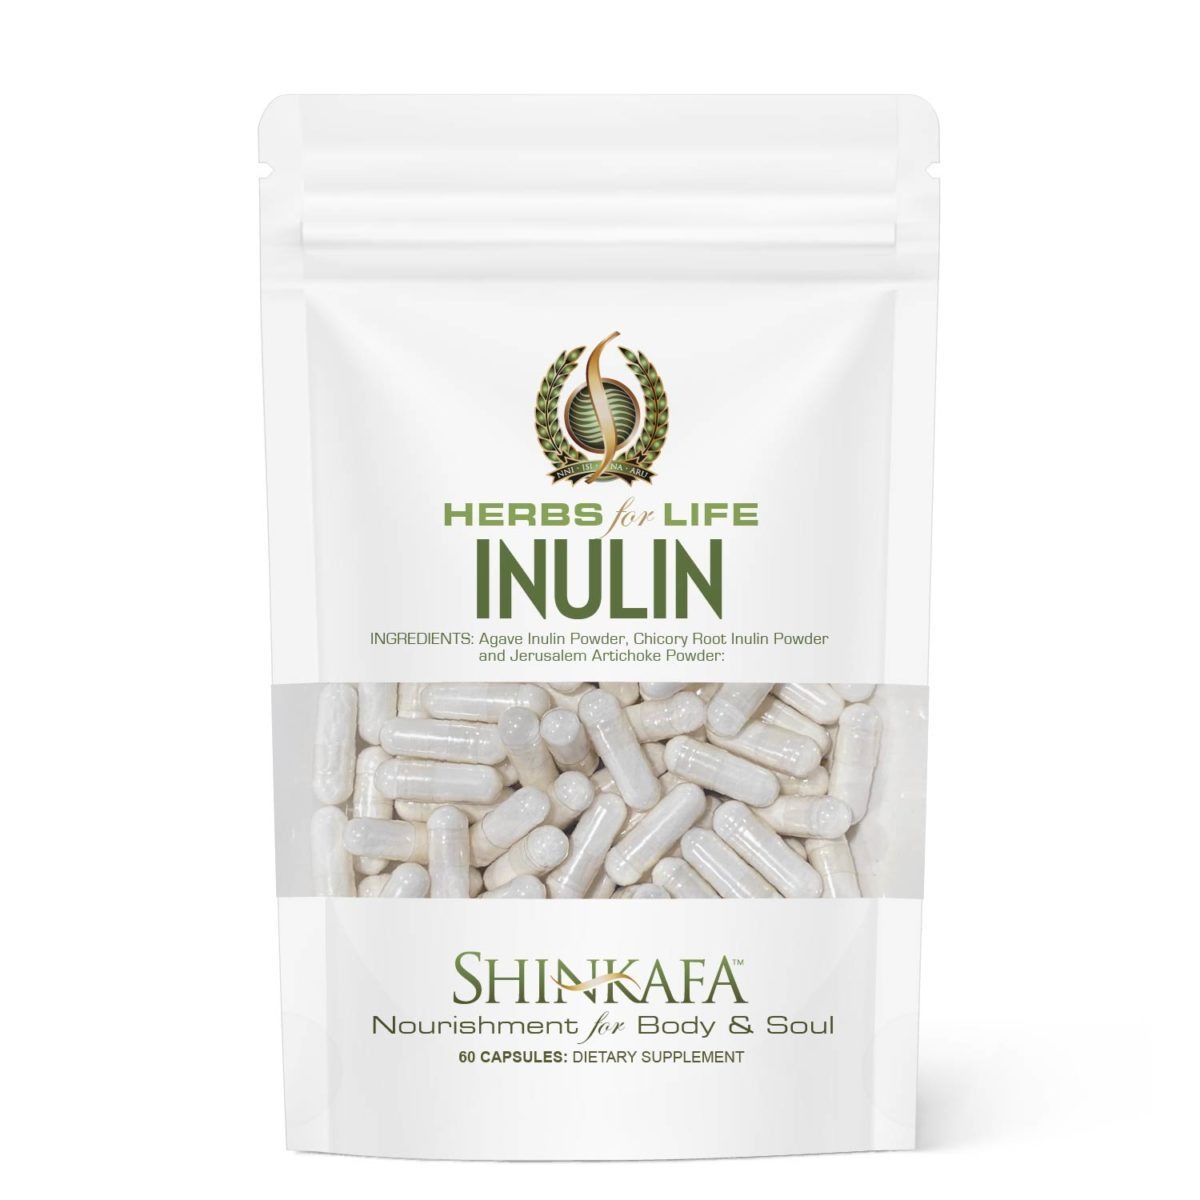 Inulin Herbs for Life by Shinkafa - Front